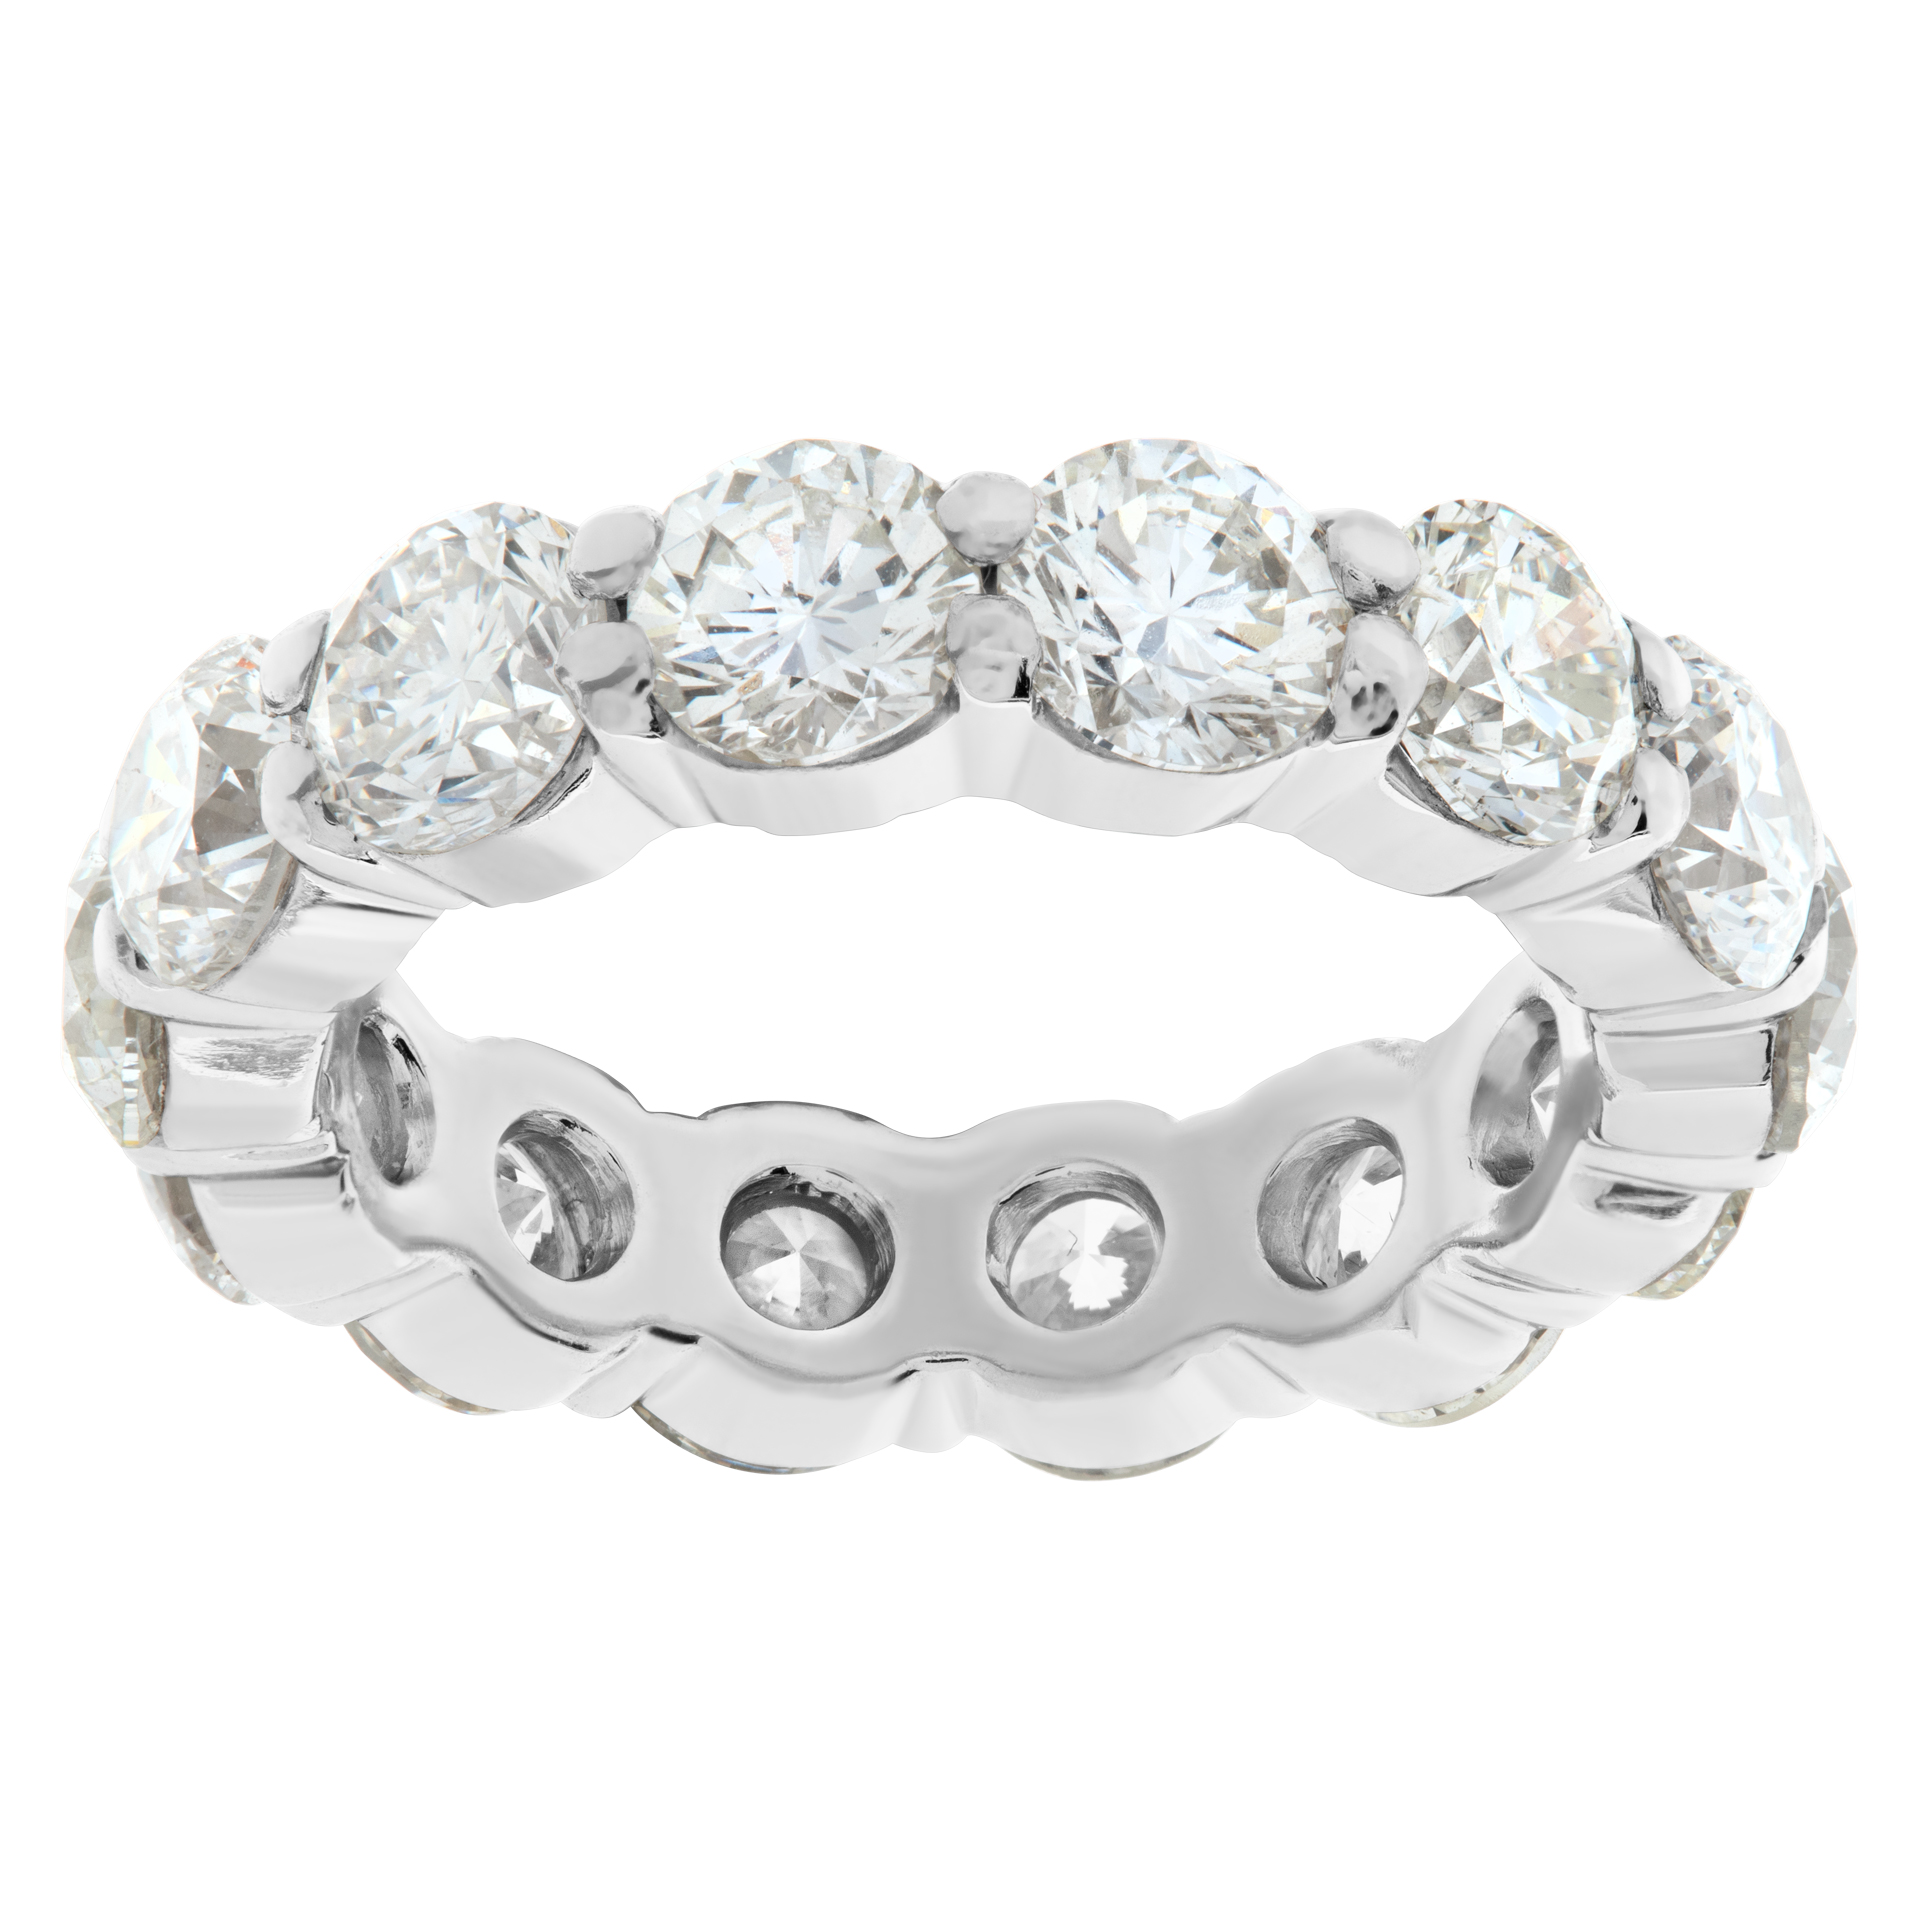 Platinum eternity band with approximately 5 carats in diamonds